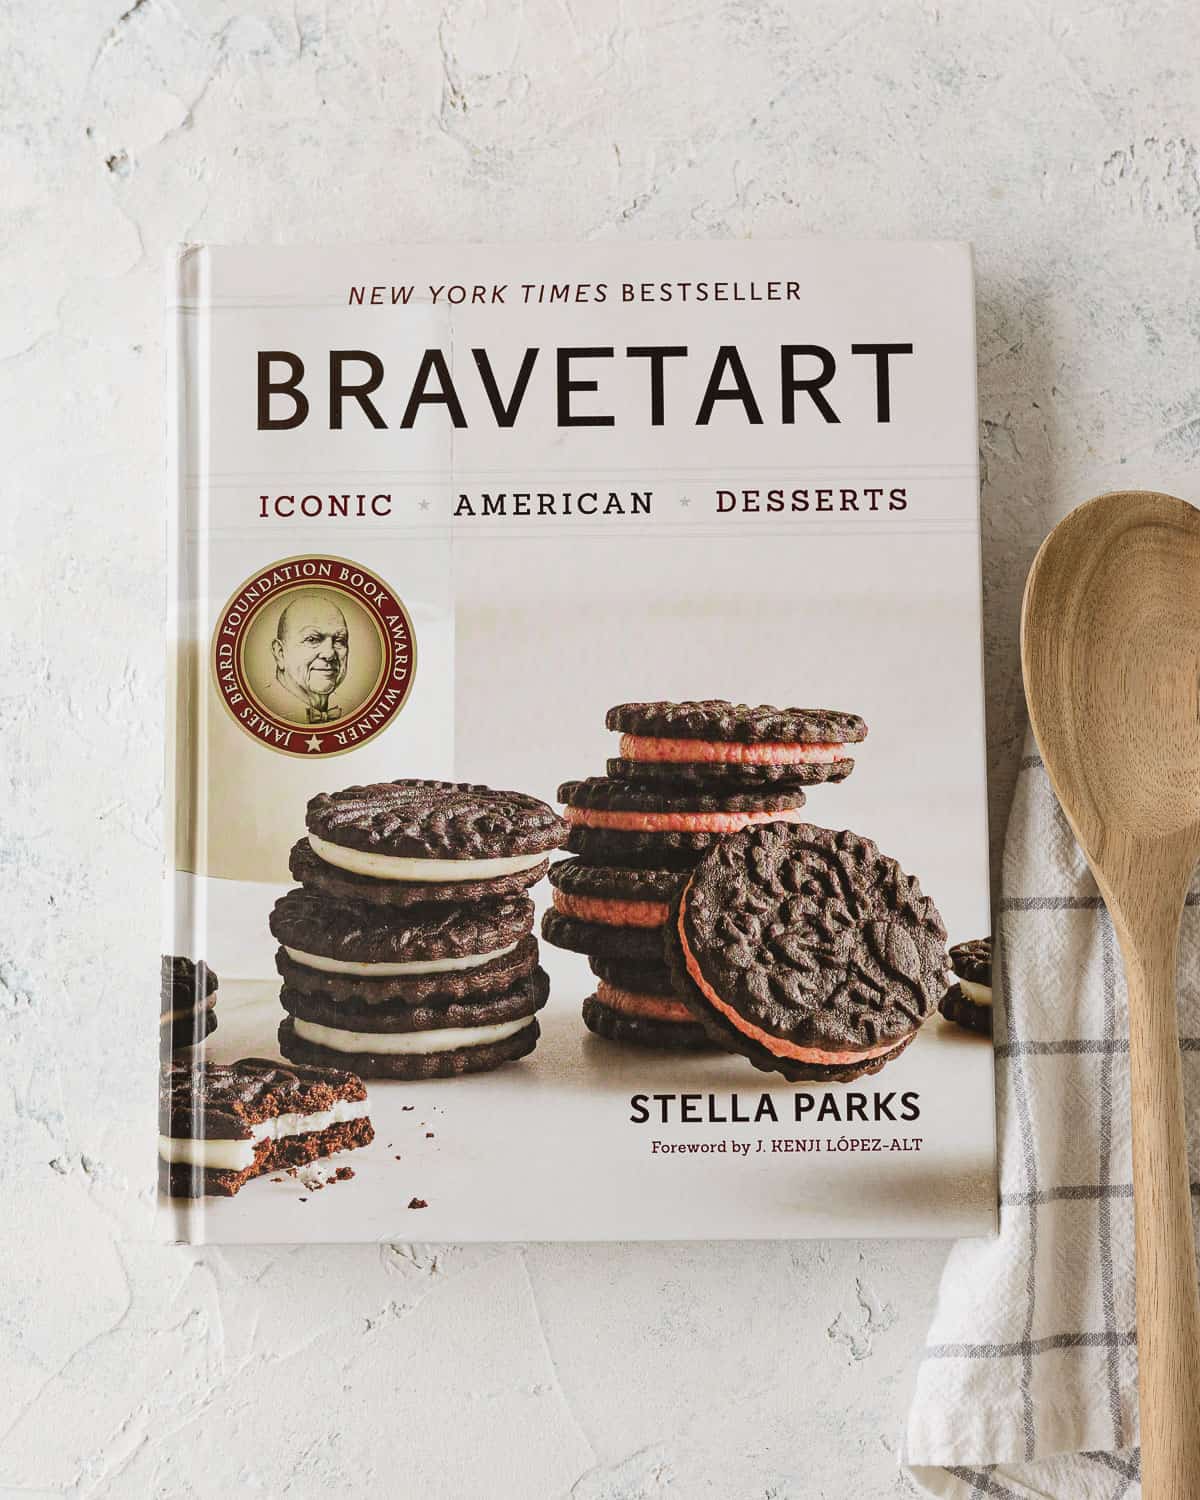 "BraveTart" book on a rustic surface with a towel and wooden spoon.